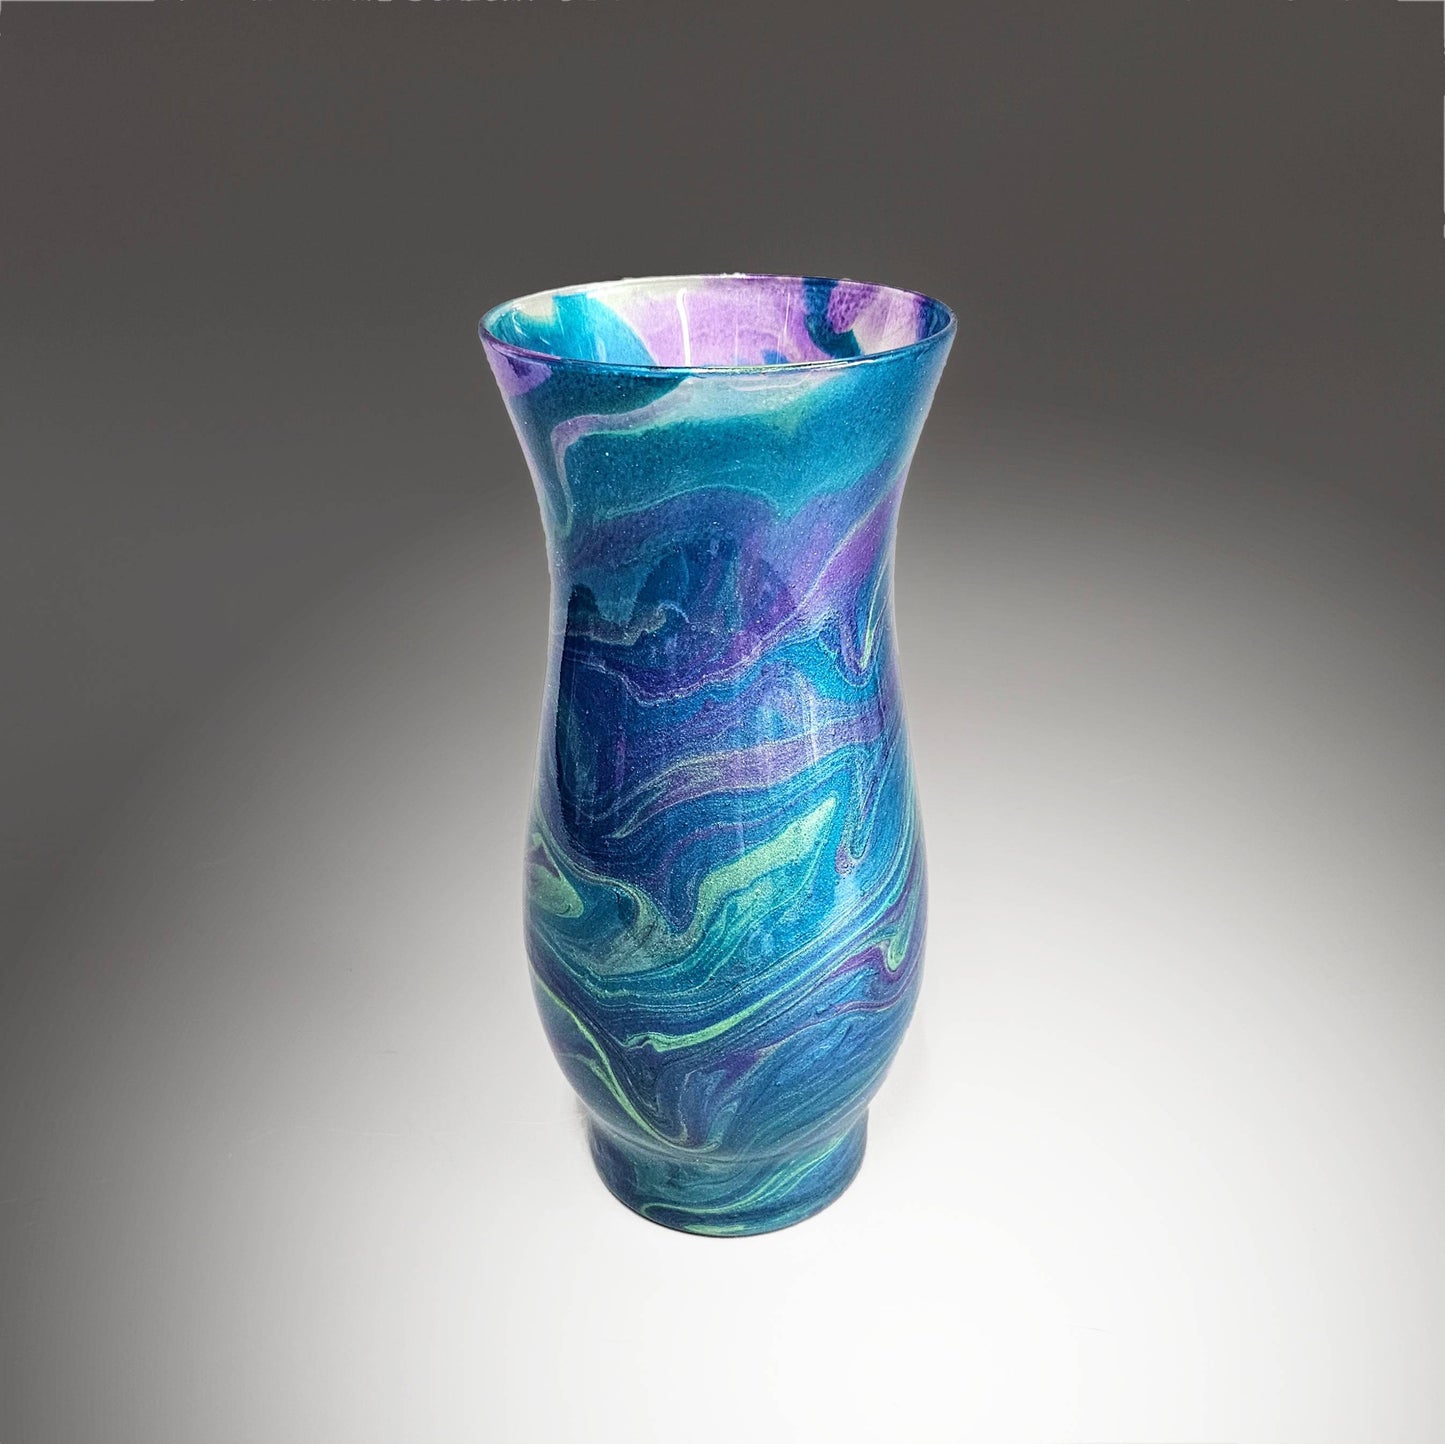 This abstract, painted glass vase is the perfect accent piece for any décor. Unique and one-of-a-kind, you're sure to get many compliments on this unique design. Done in a striking mix of metallic teal, purple and gold, it was hand painted, then sealed with multiple coats of high gloss 